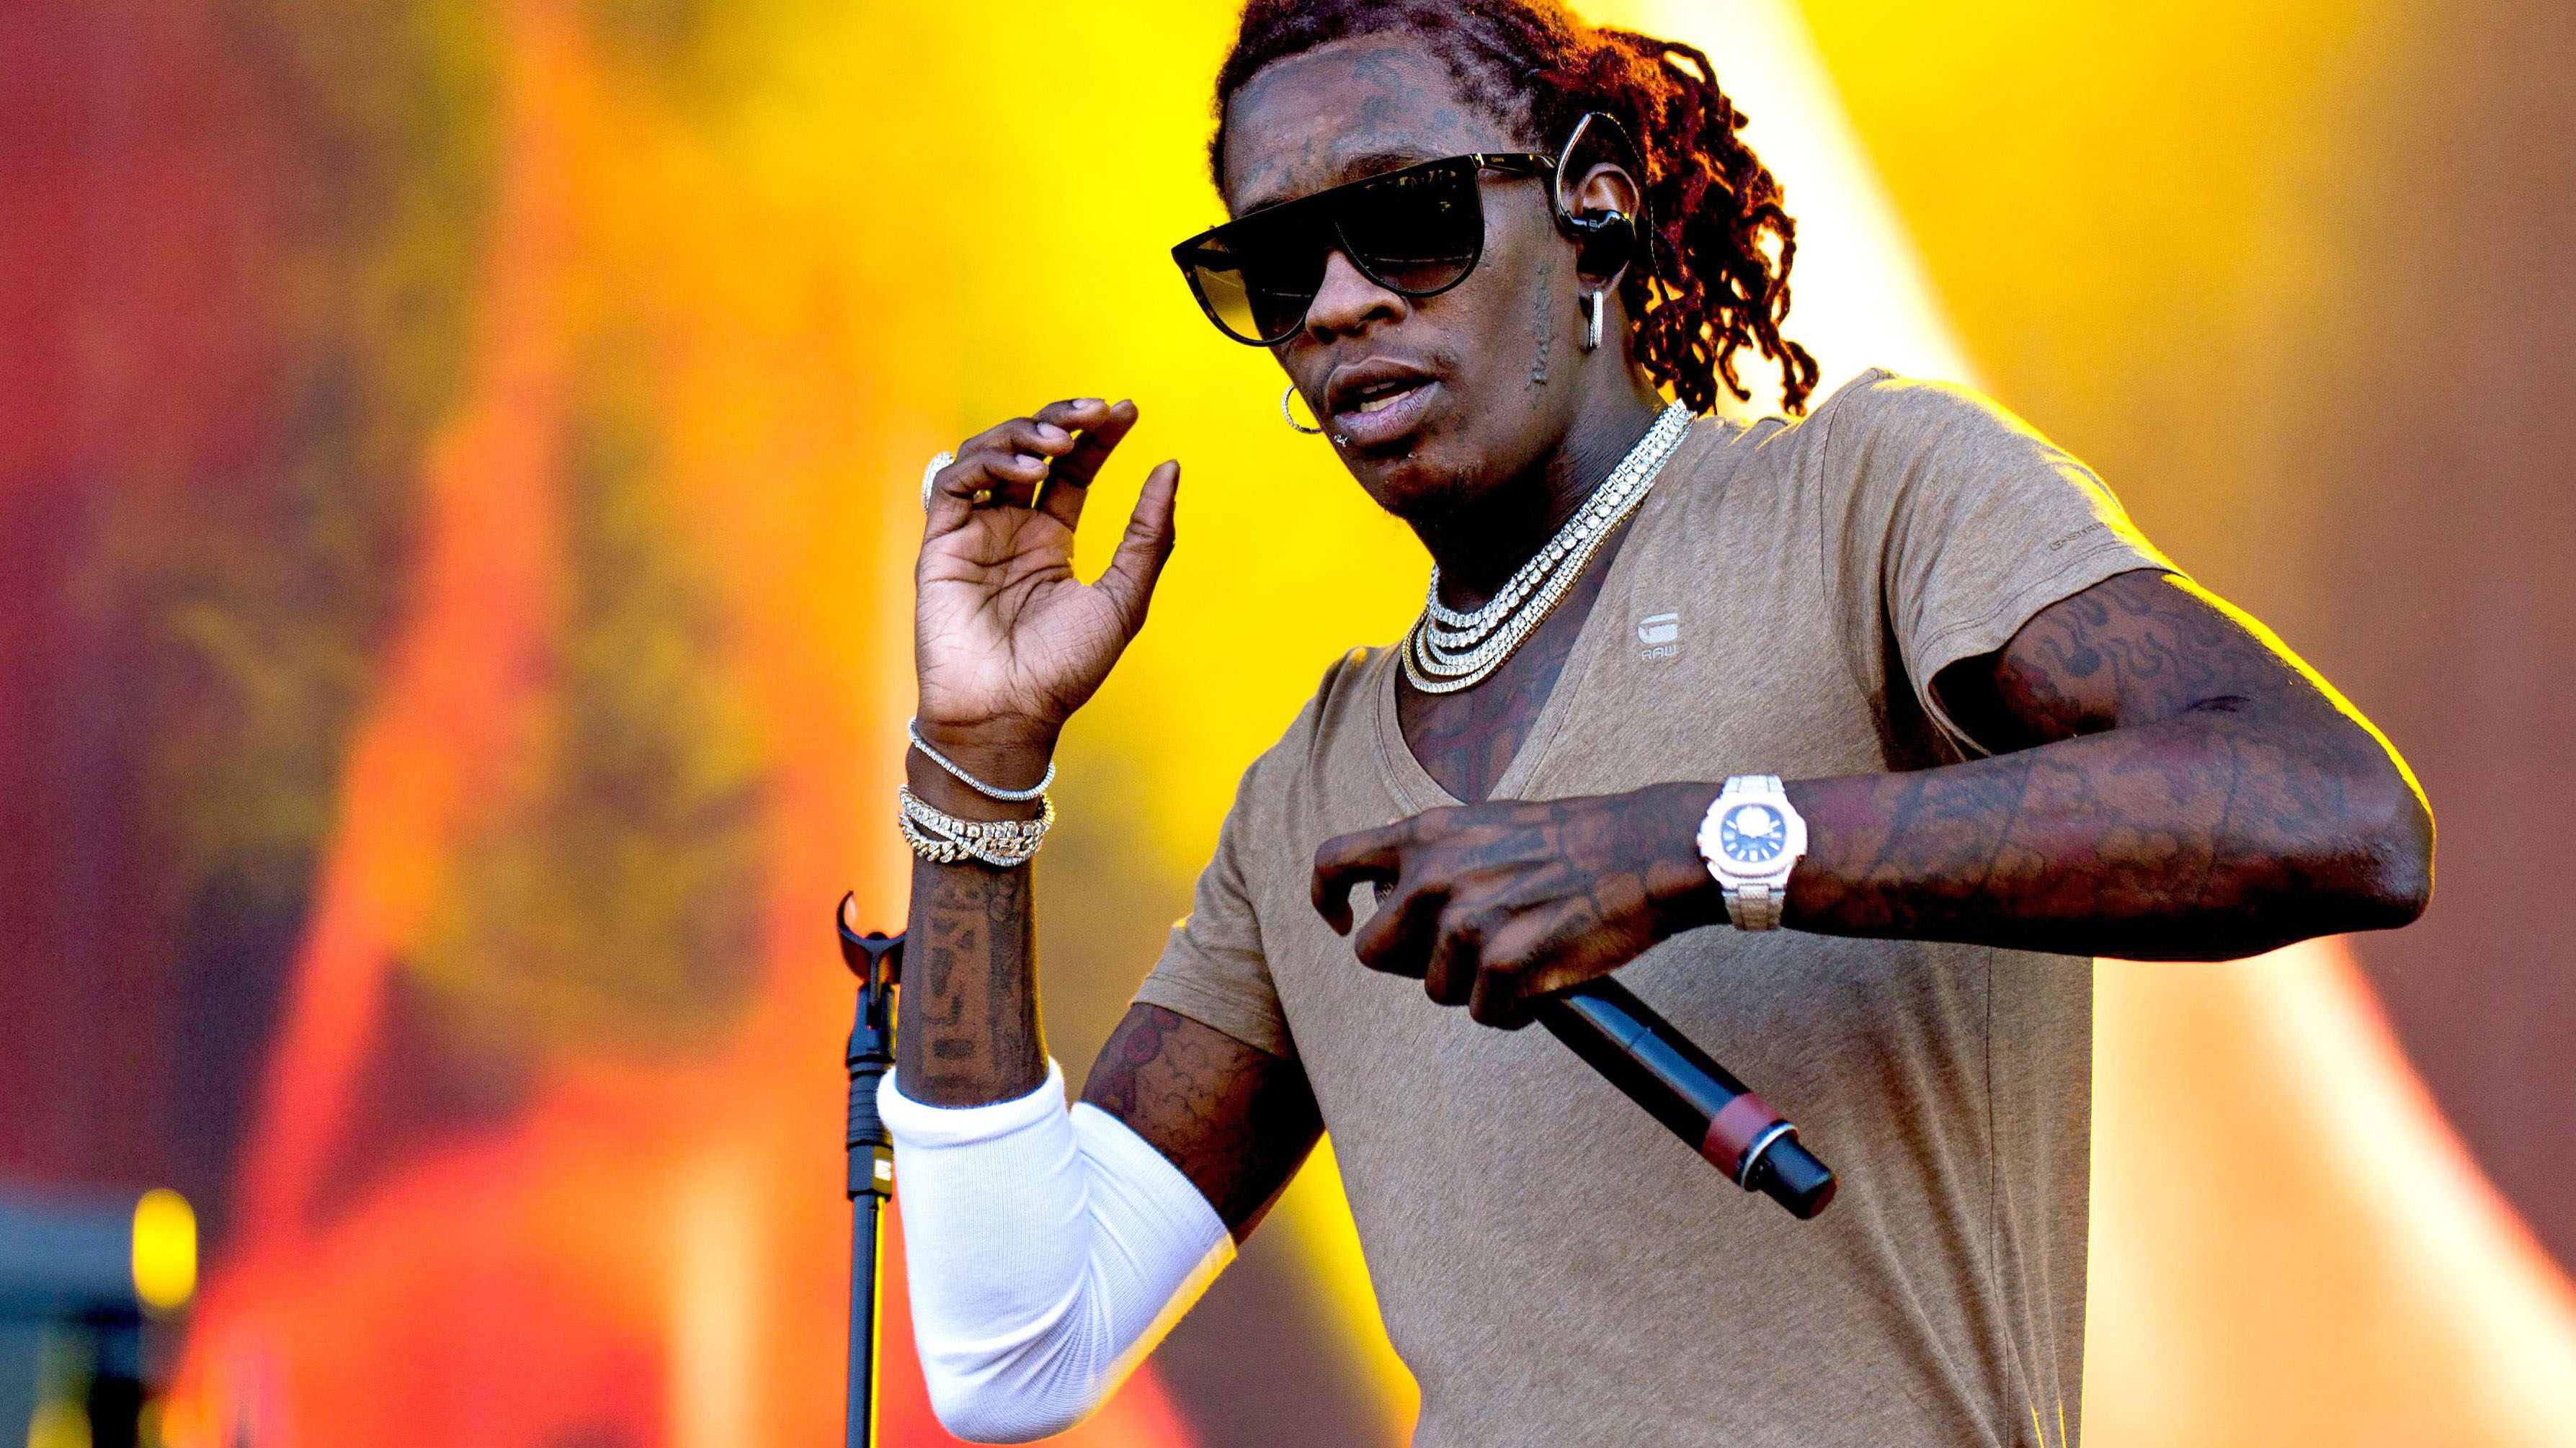 Jeffery Lamar Williams (born August 16, 1991), known professionally as Young Thug, is an American rapper, singer, and songwriter. He is considered to ...